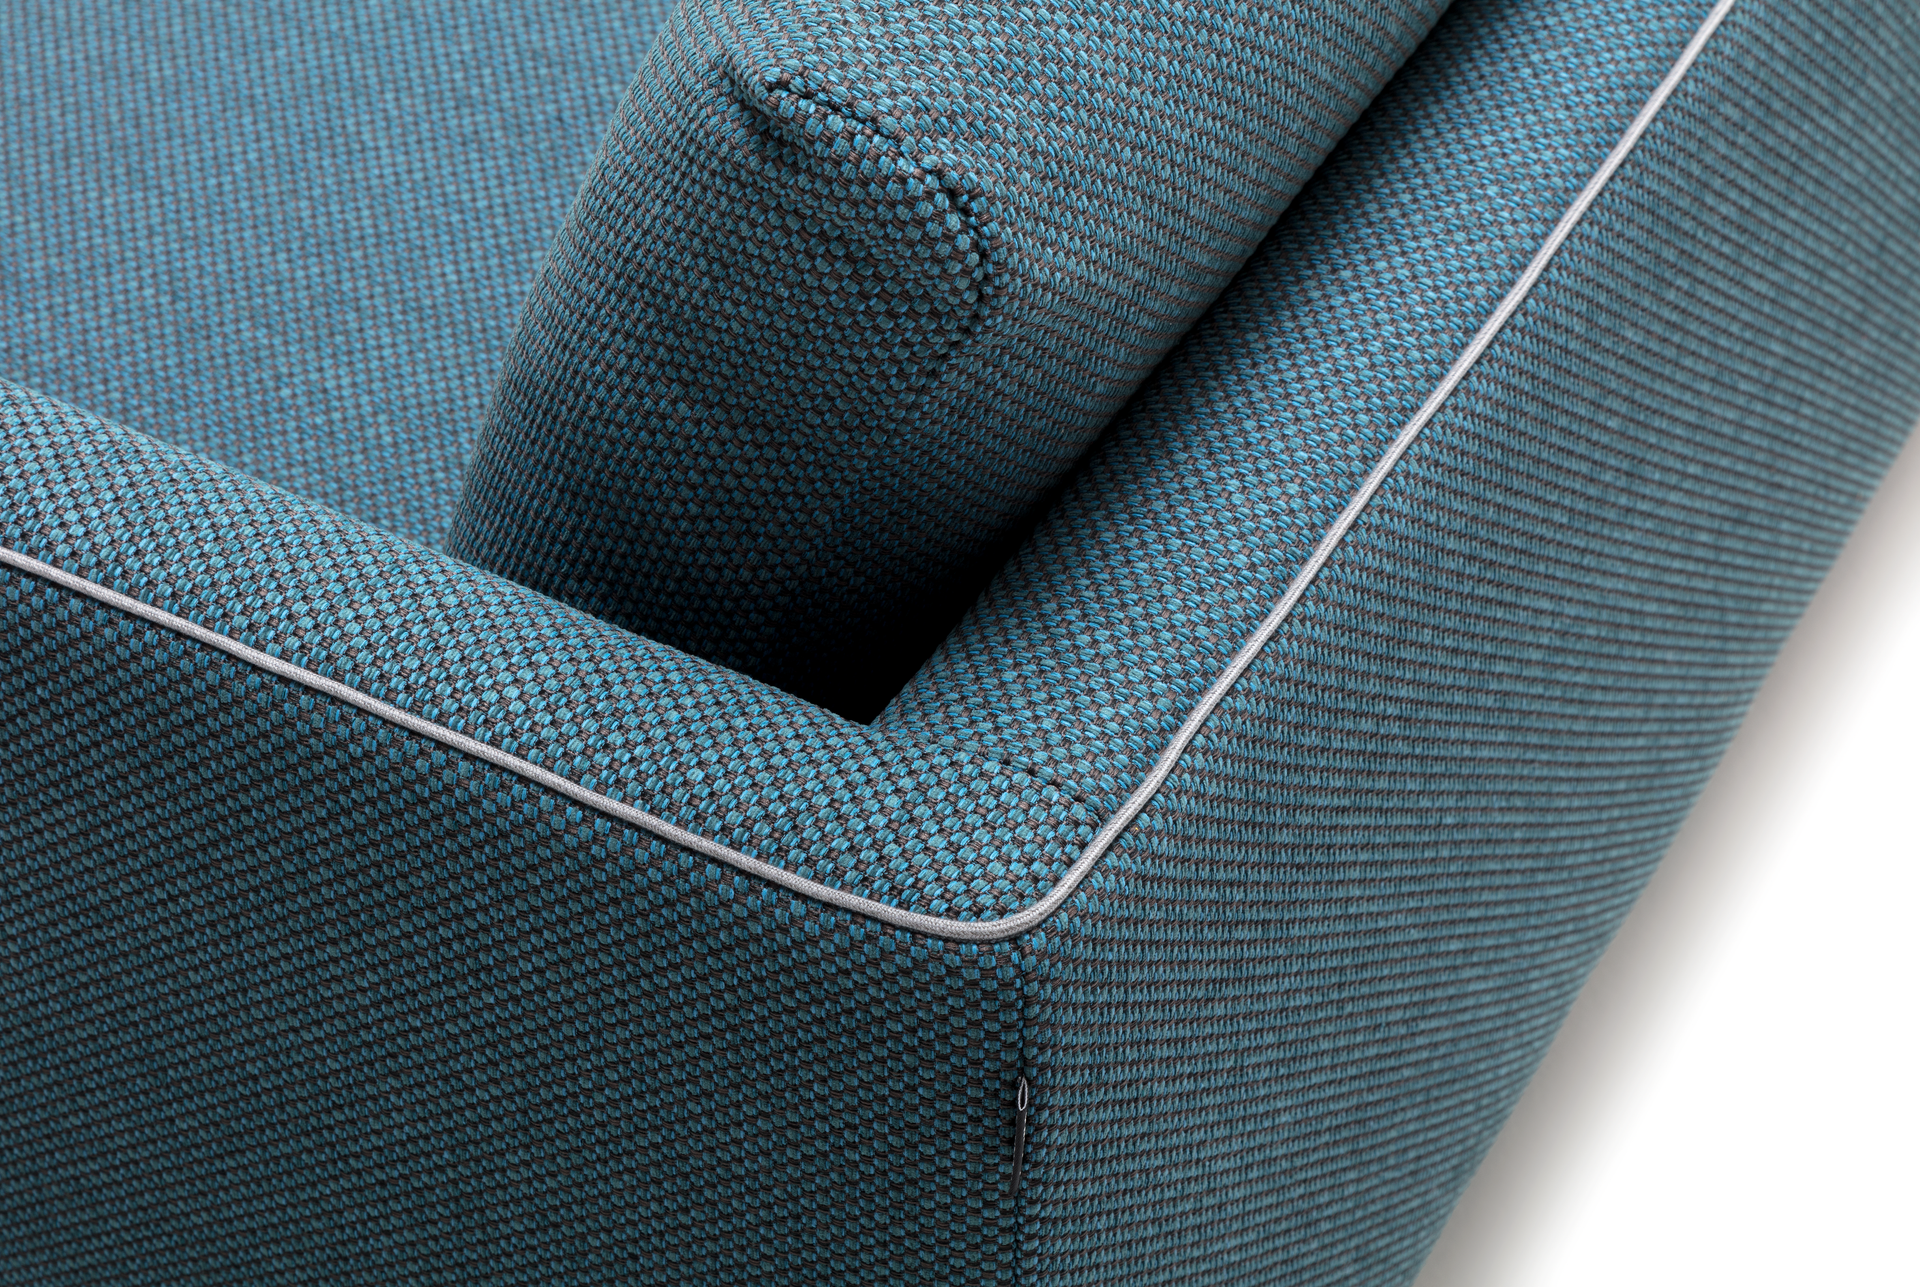 Freistil by Rolf Benz 133 sofa in blue fabric close-up back detail